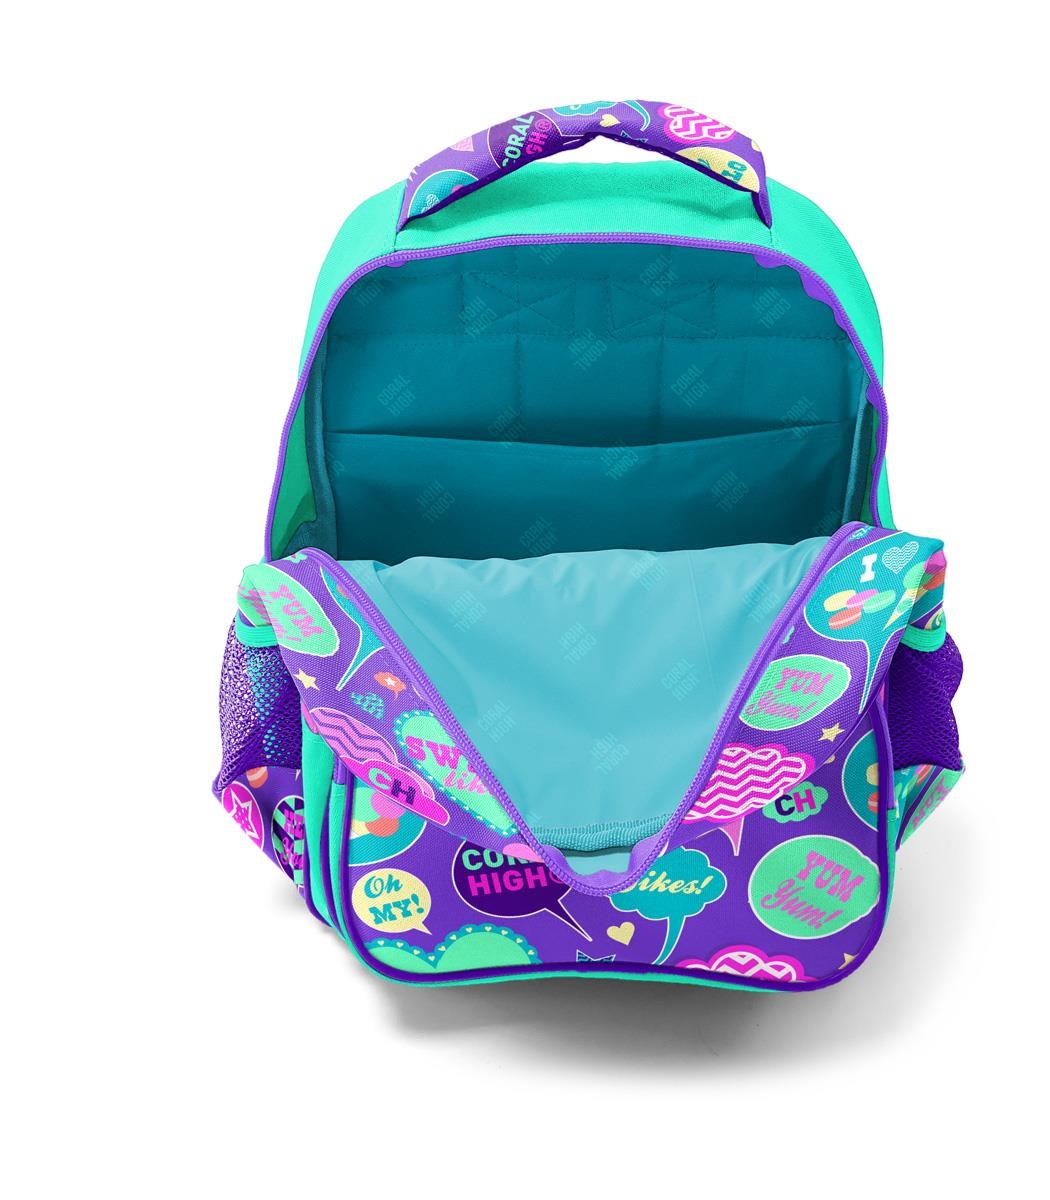 Coral High Kids Three Compartment School Backpack - Water Green Purple Patterned